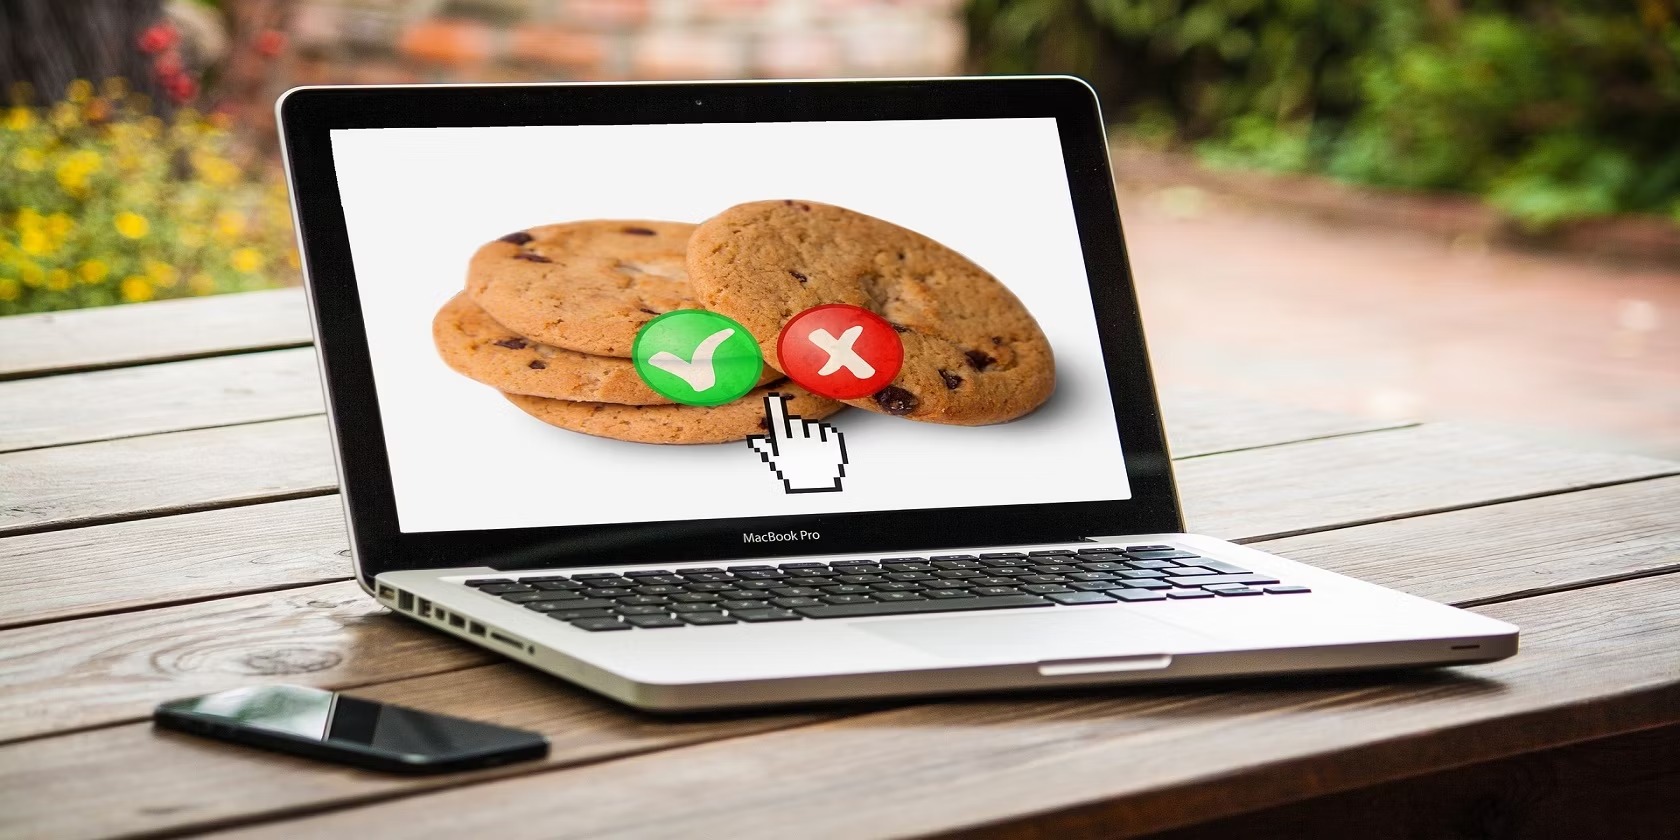 How To Enable Cookies In Your Browser